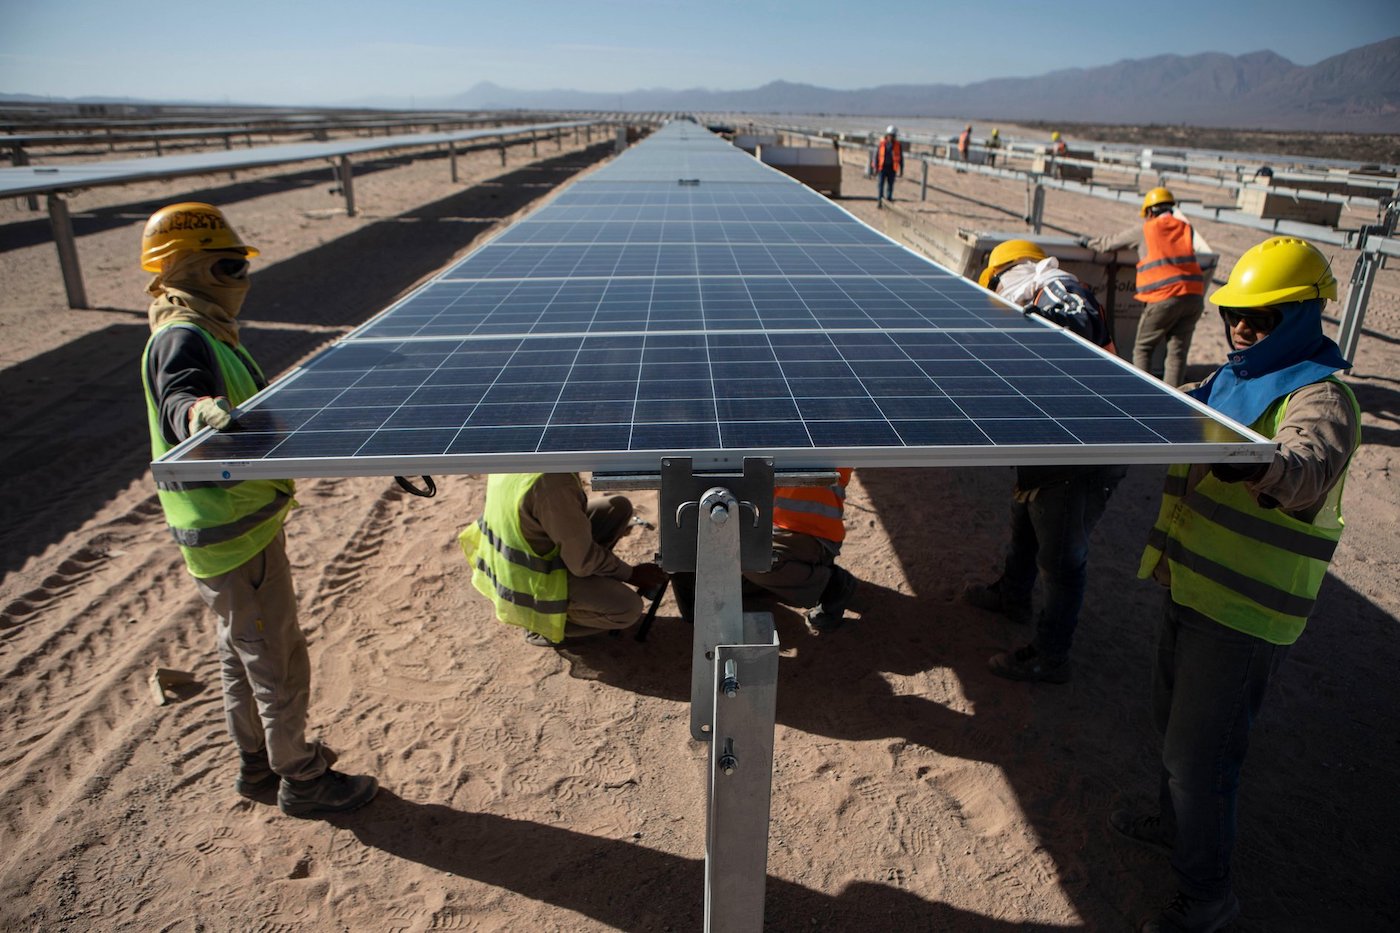 Workers install solar panels at a PowerChina plant in Argentina